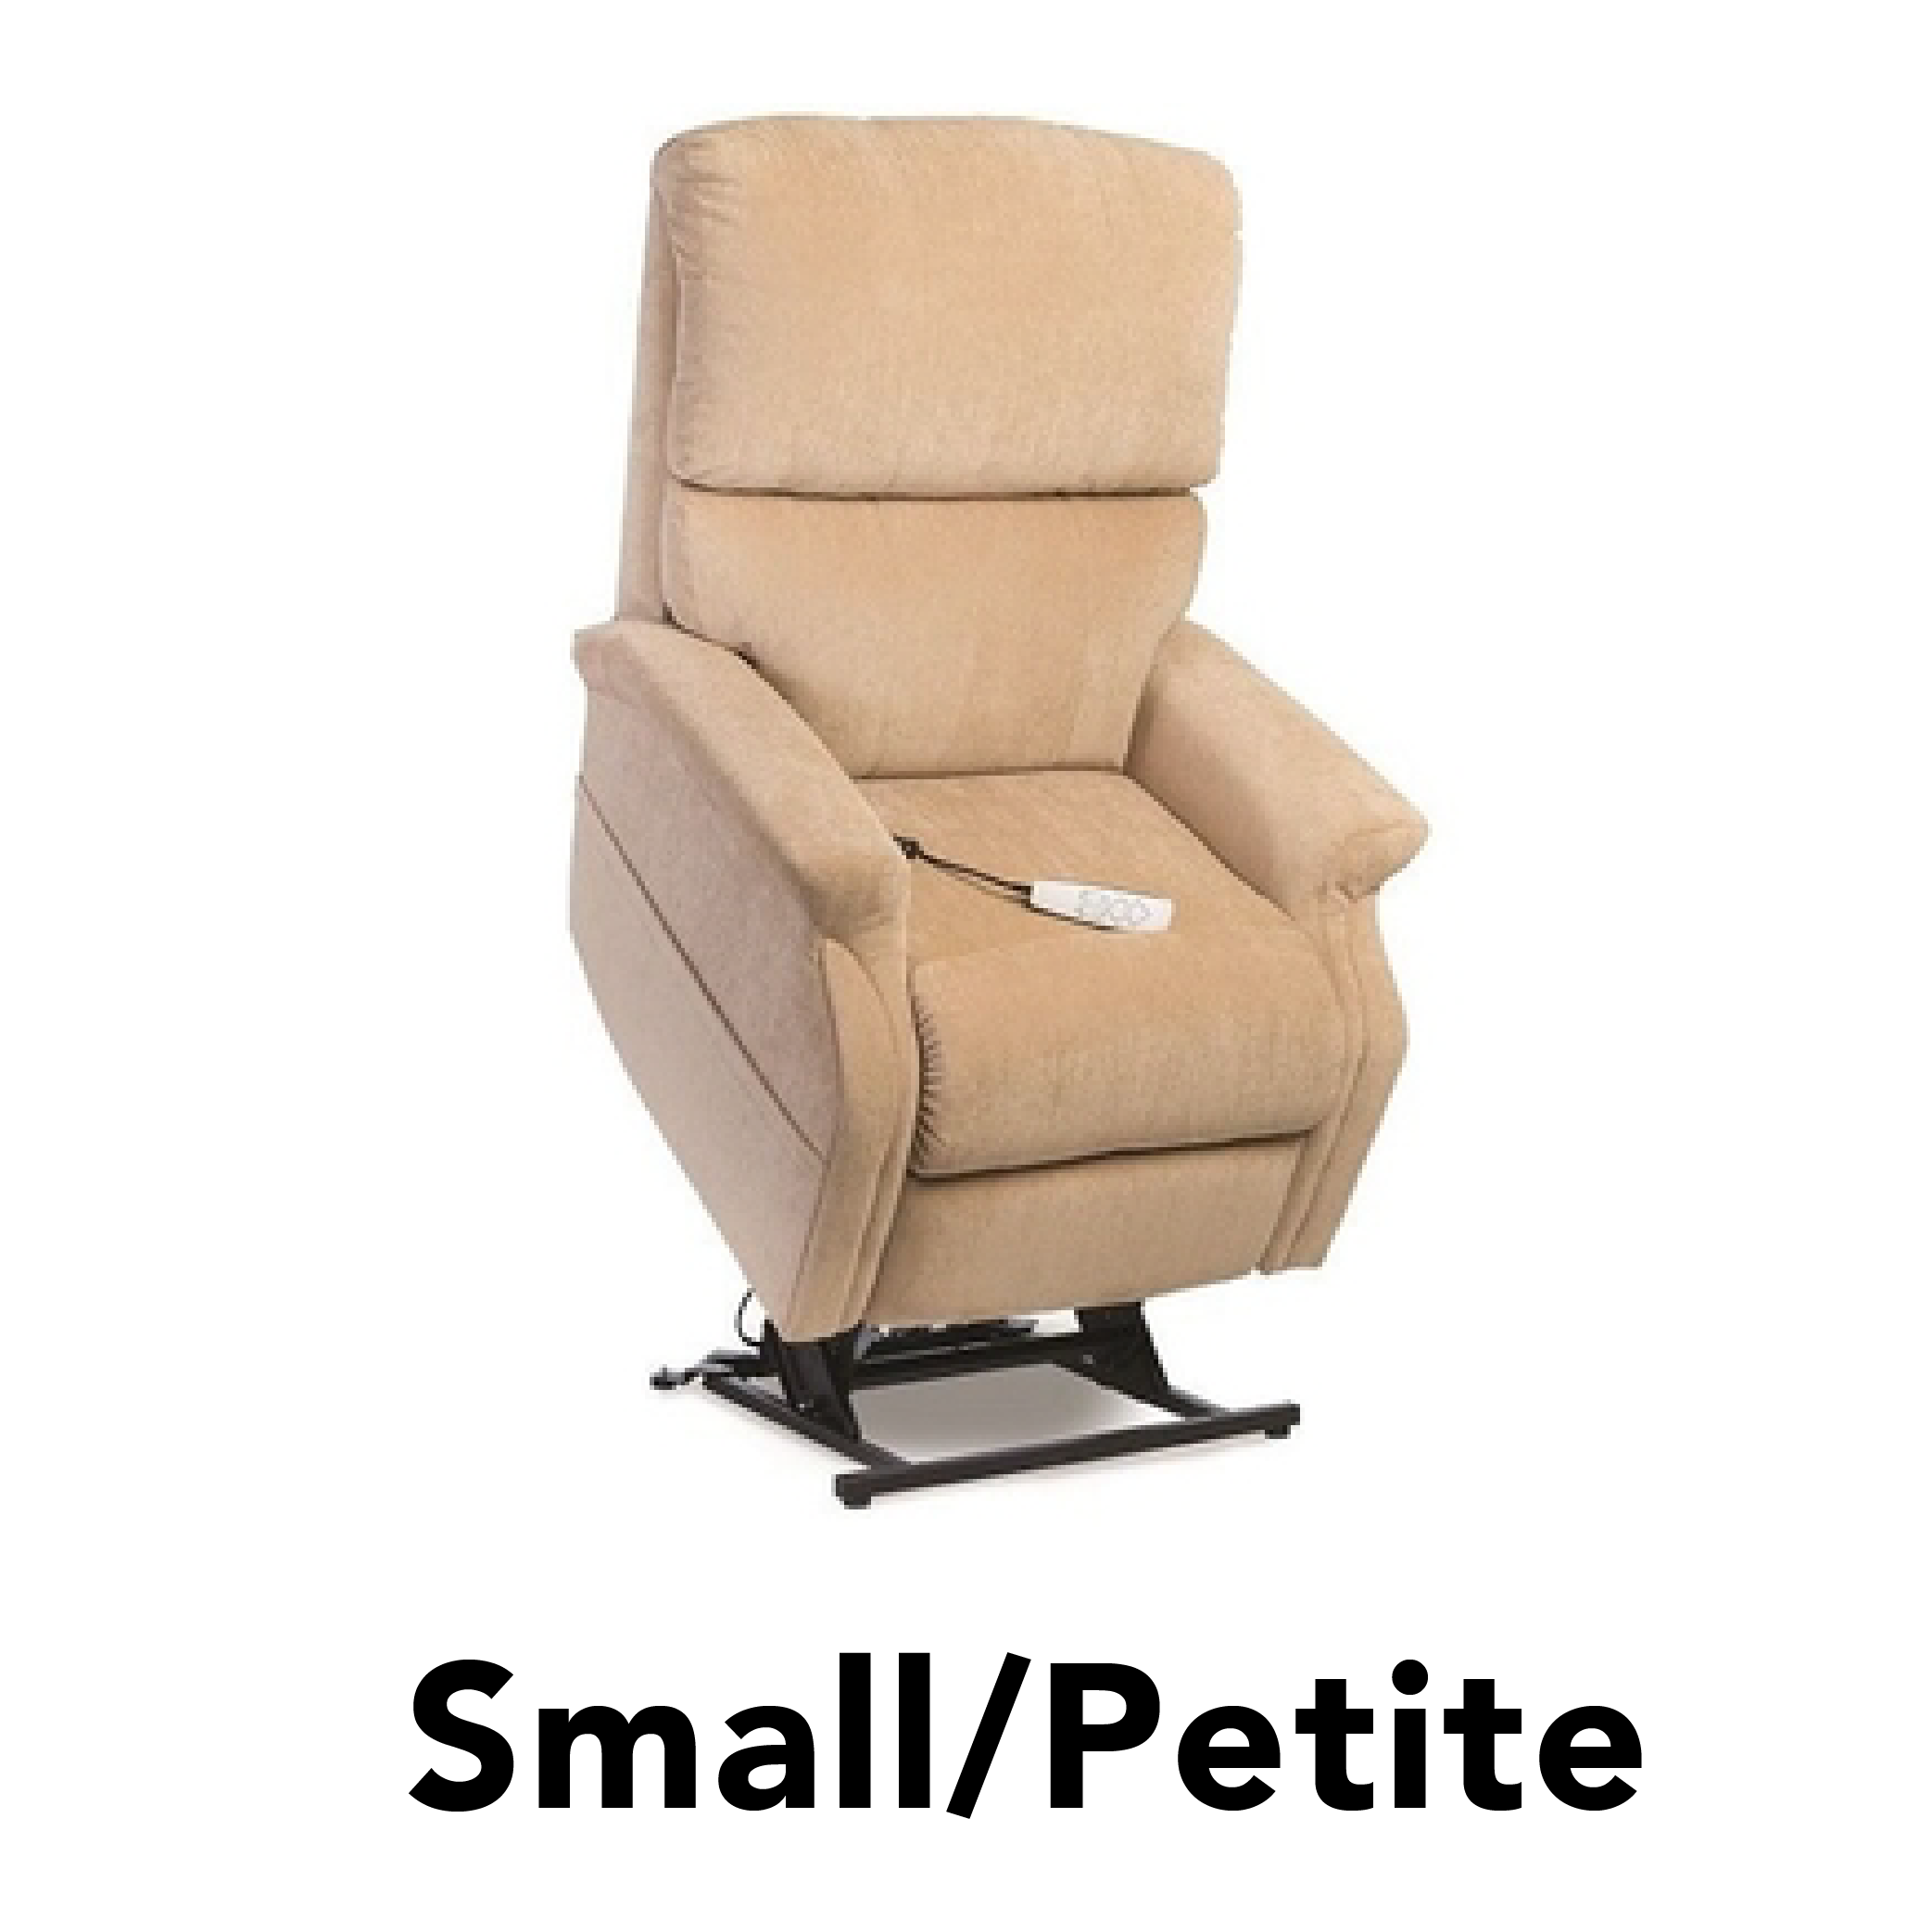 small/petite lift chair